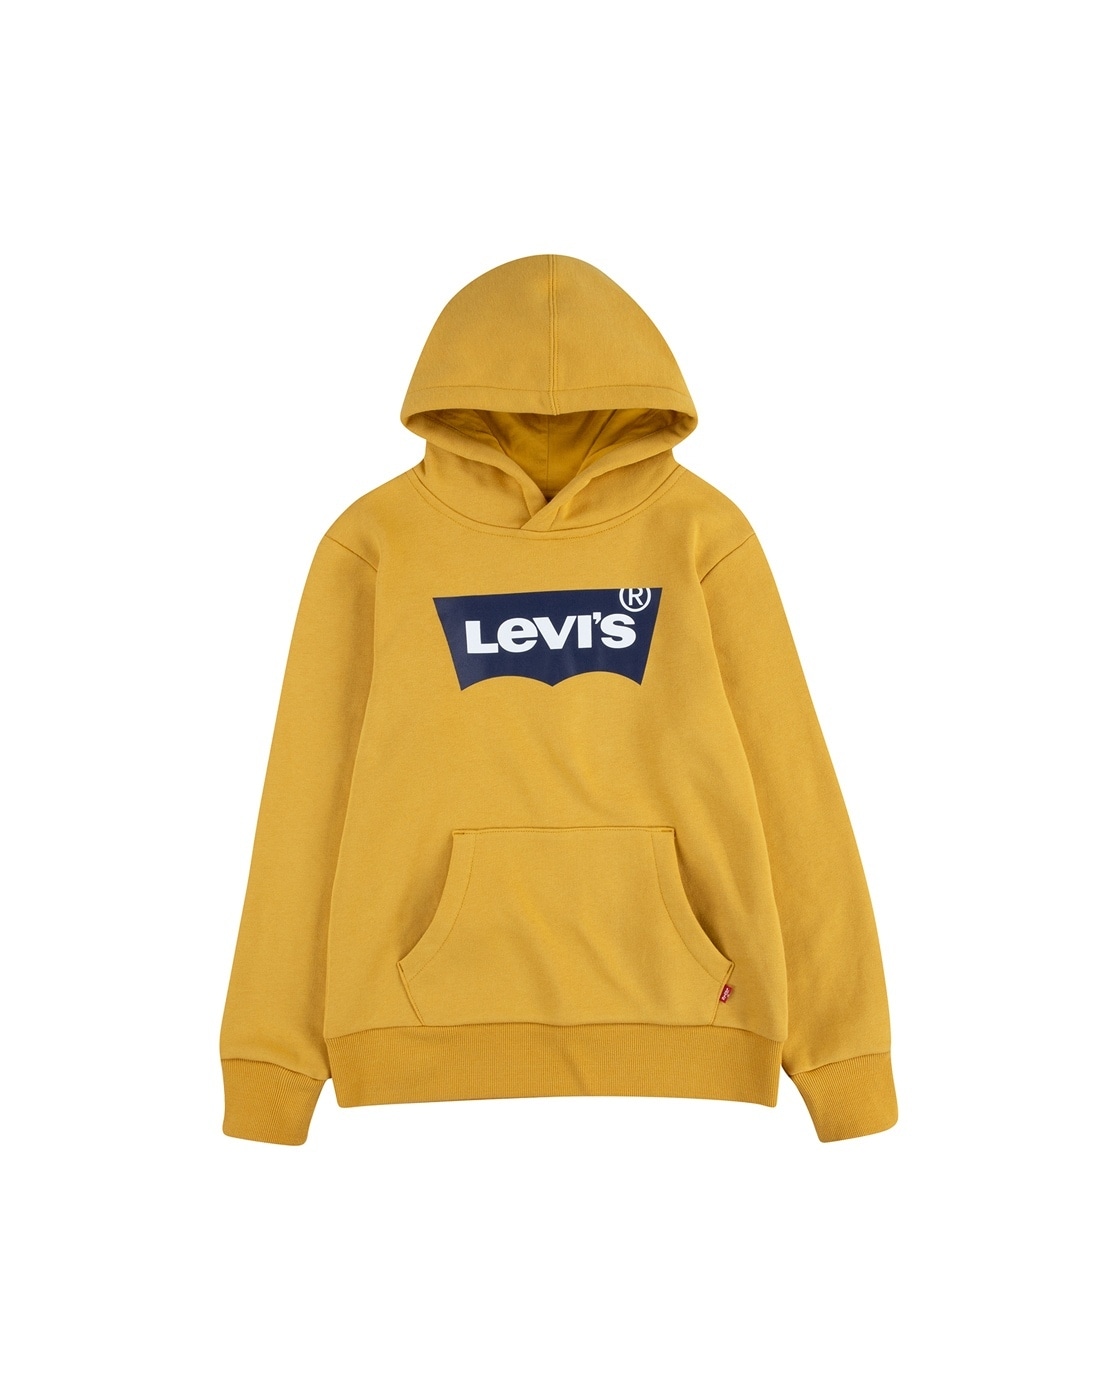 Buy Yellow Sweatshirts & Hoodie for Boys by LEVIS Online 